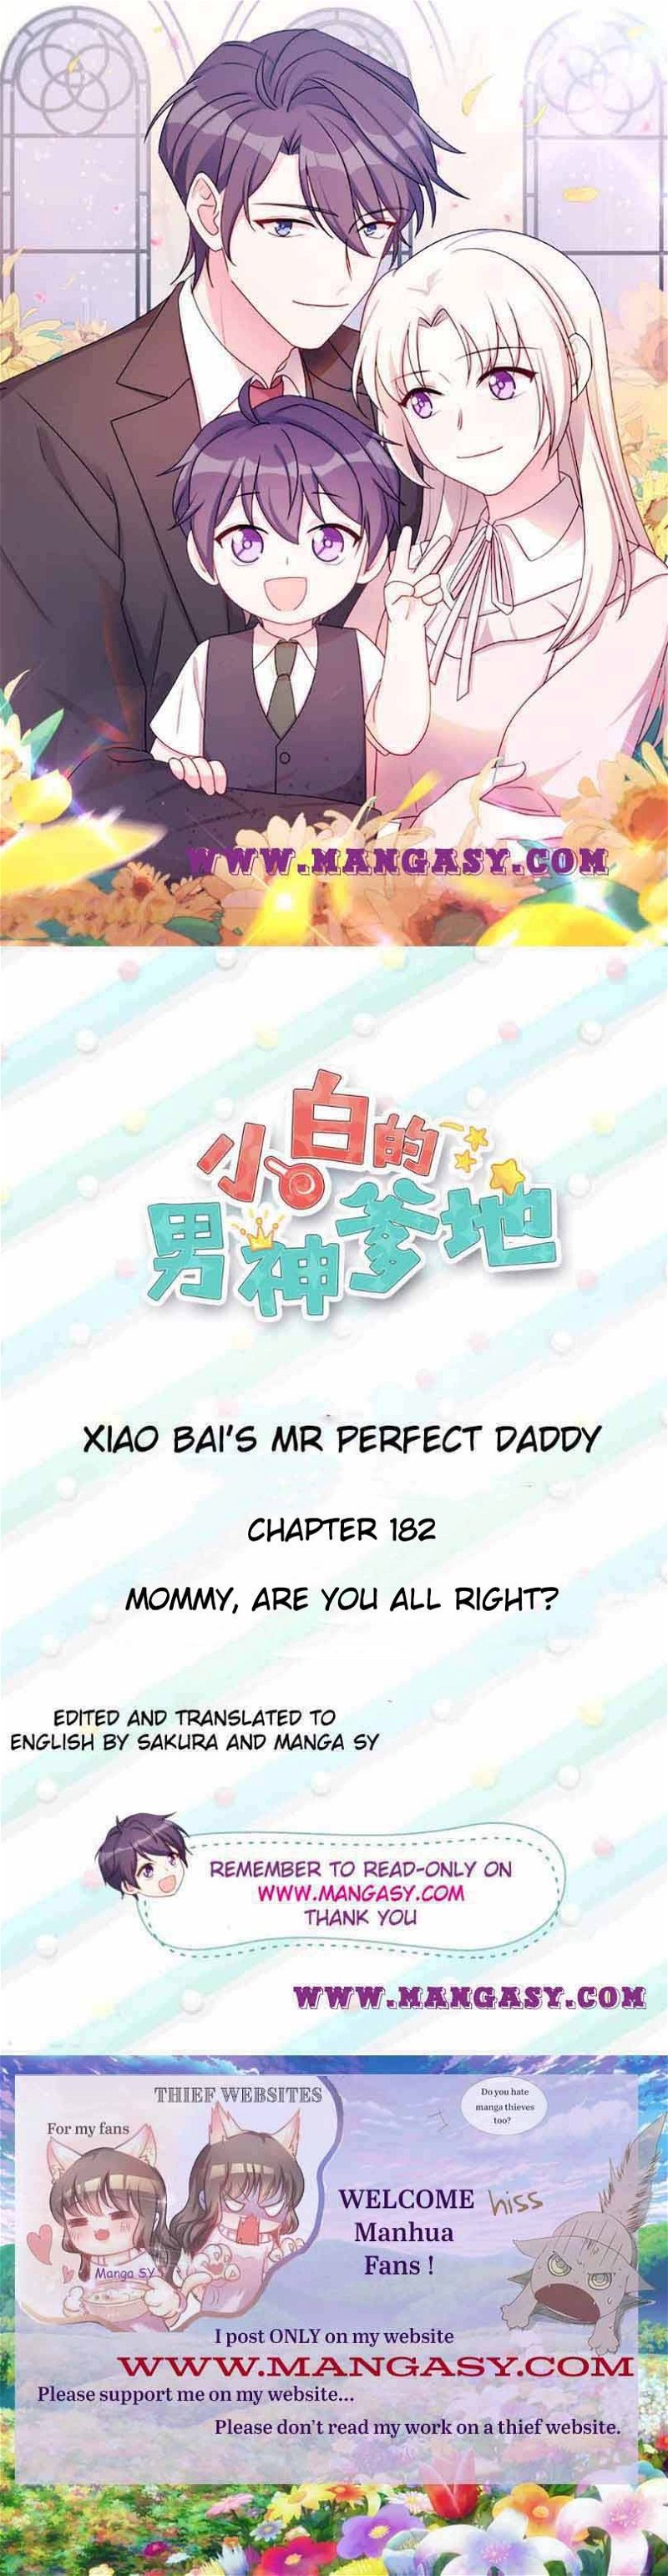 Xiao Bai’s father is a wonderful person Chapter 182 - Page 0